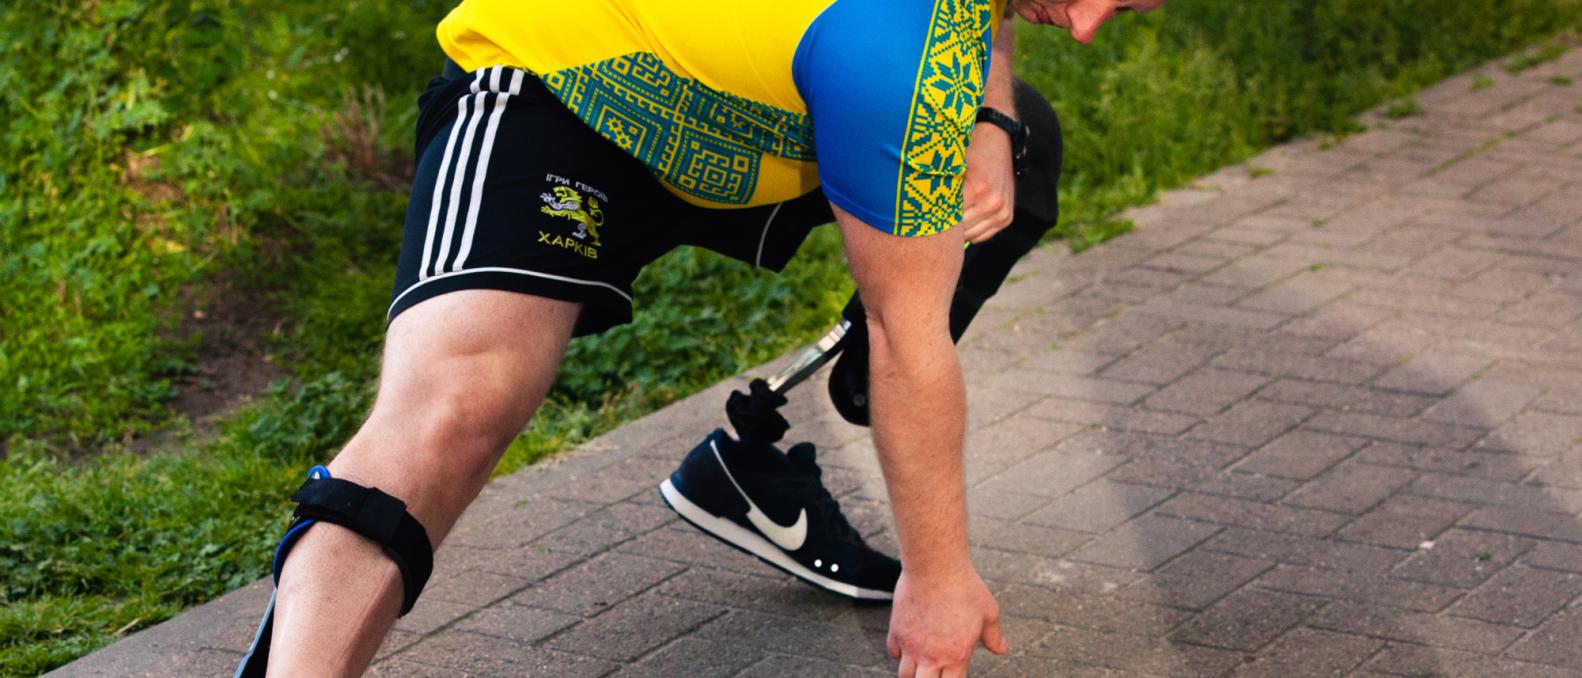 Athlete in yellow jersey stretches before run, prosthetic leg visible.